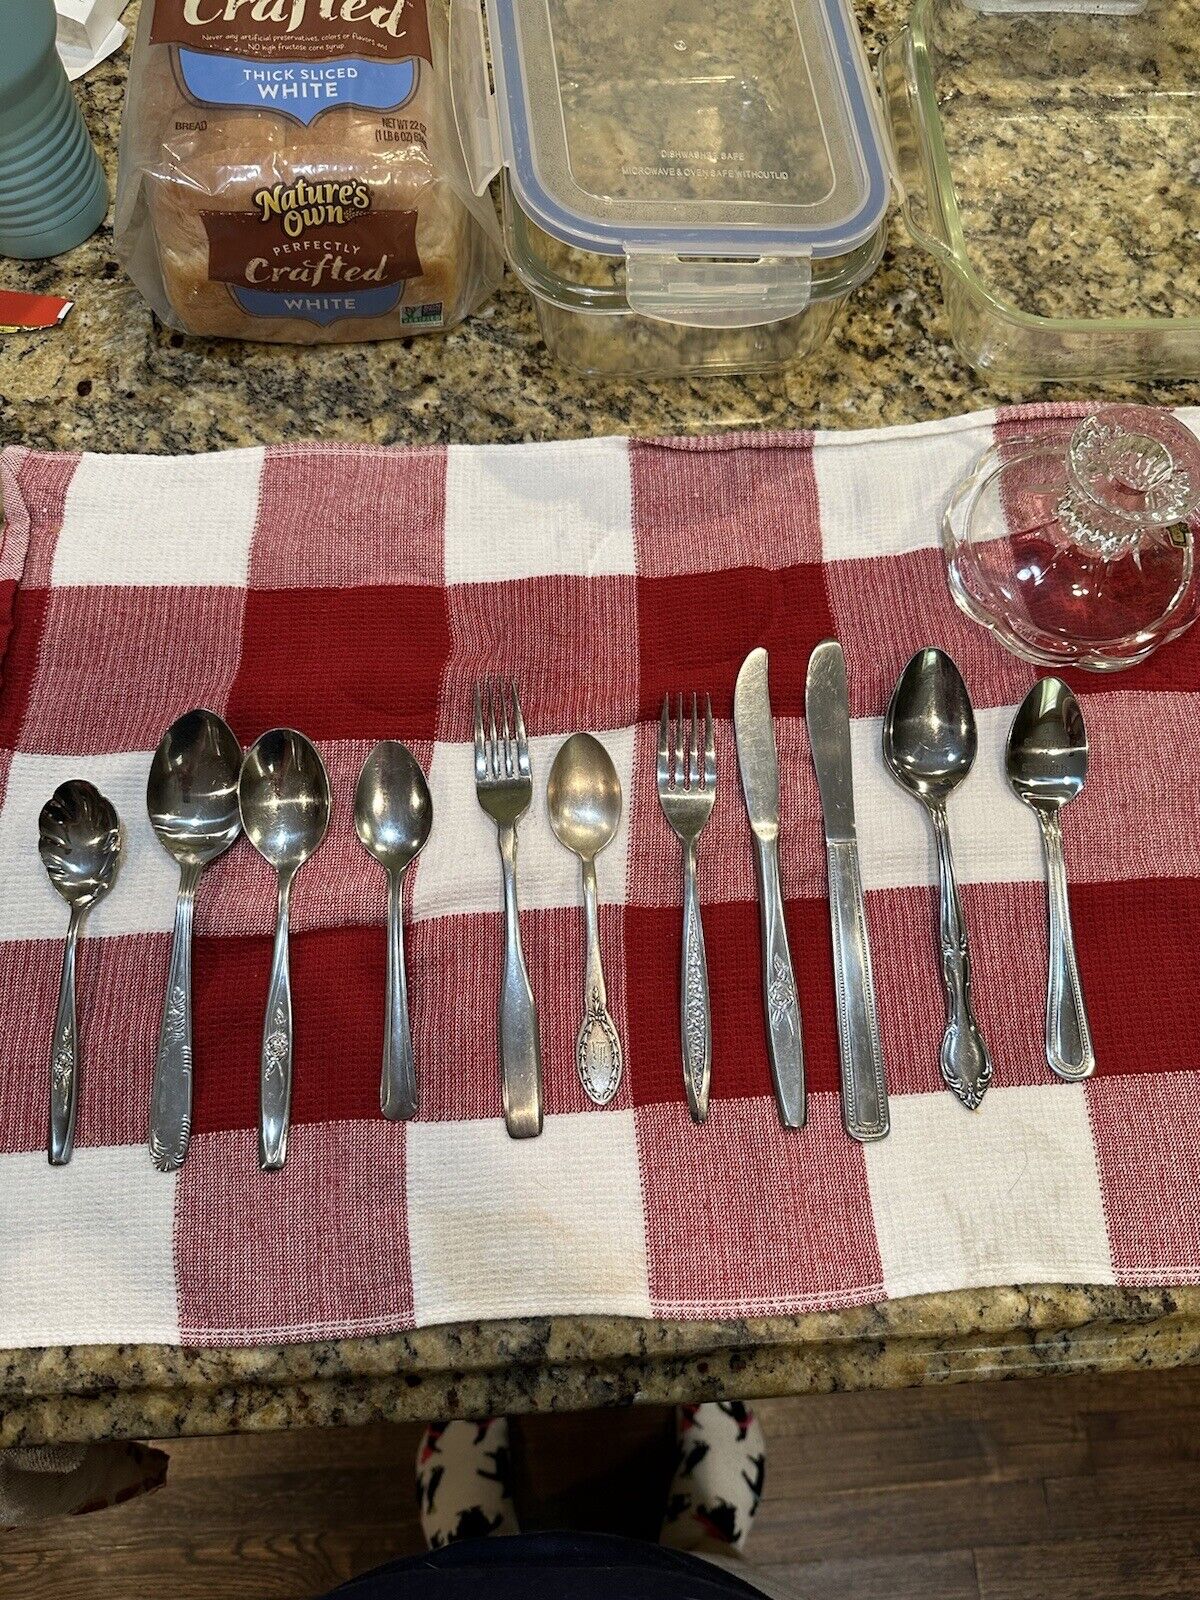 Lot of 11 Pieces of Vintage Stainless Steel Flatware - Mixed Patterns